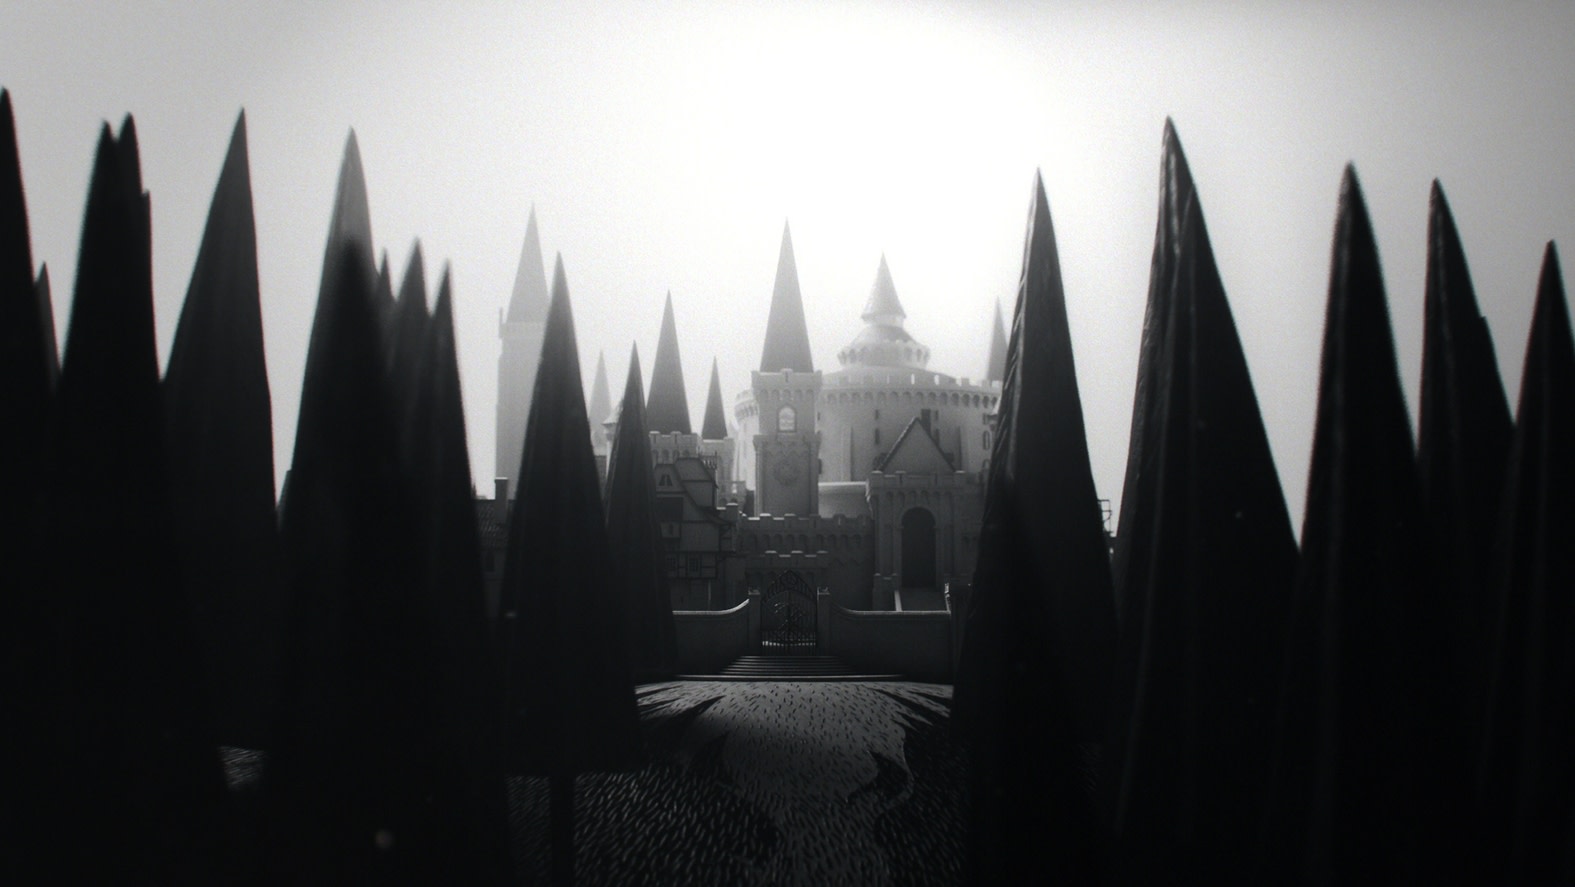 Ilvermorny School of Witchcraft and Wizardry | Wizarding World